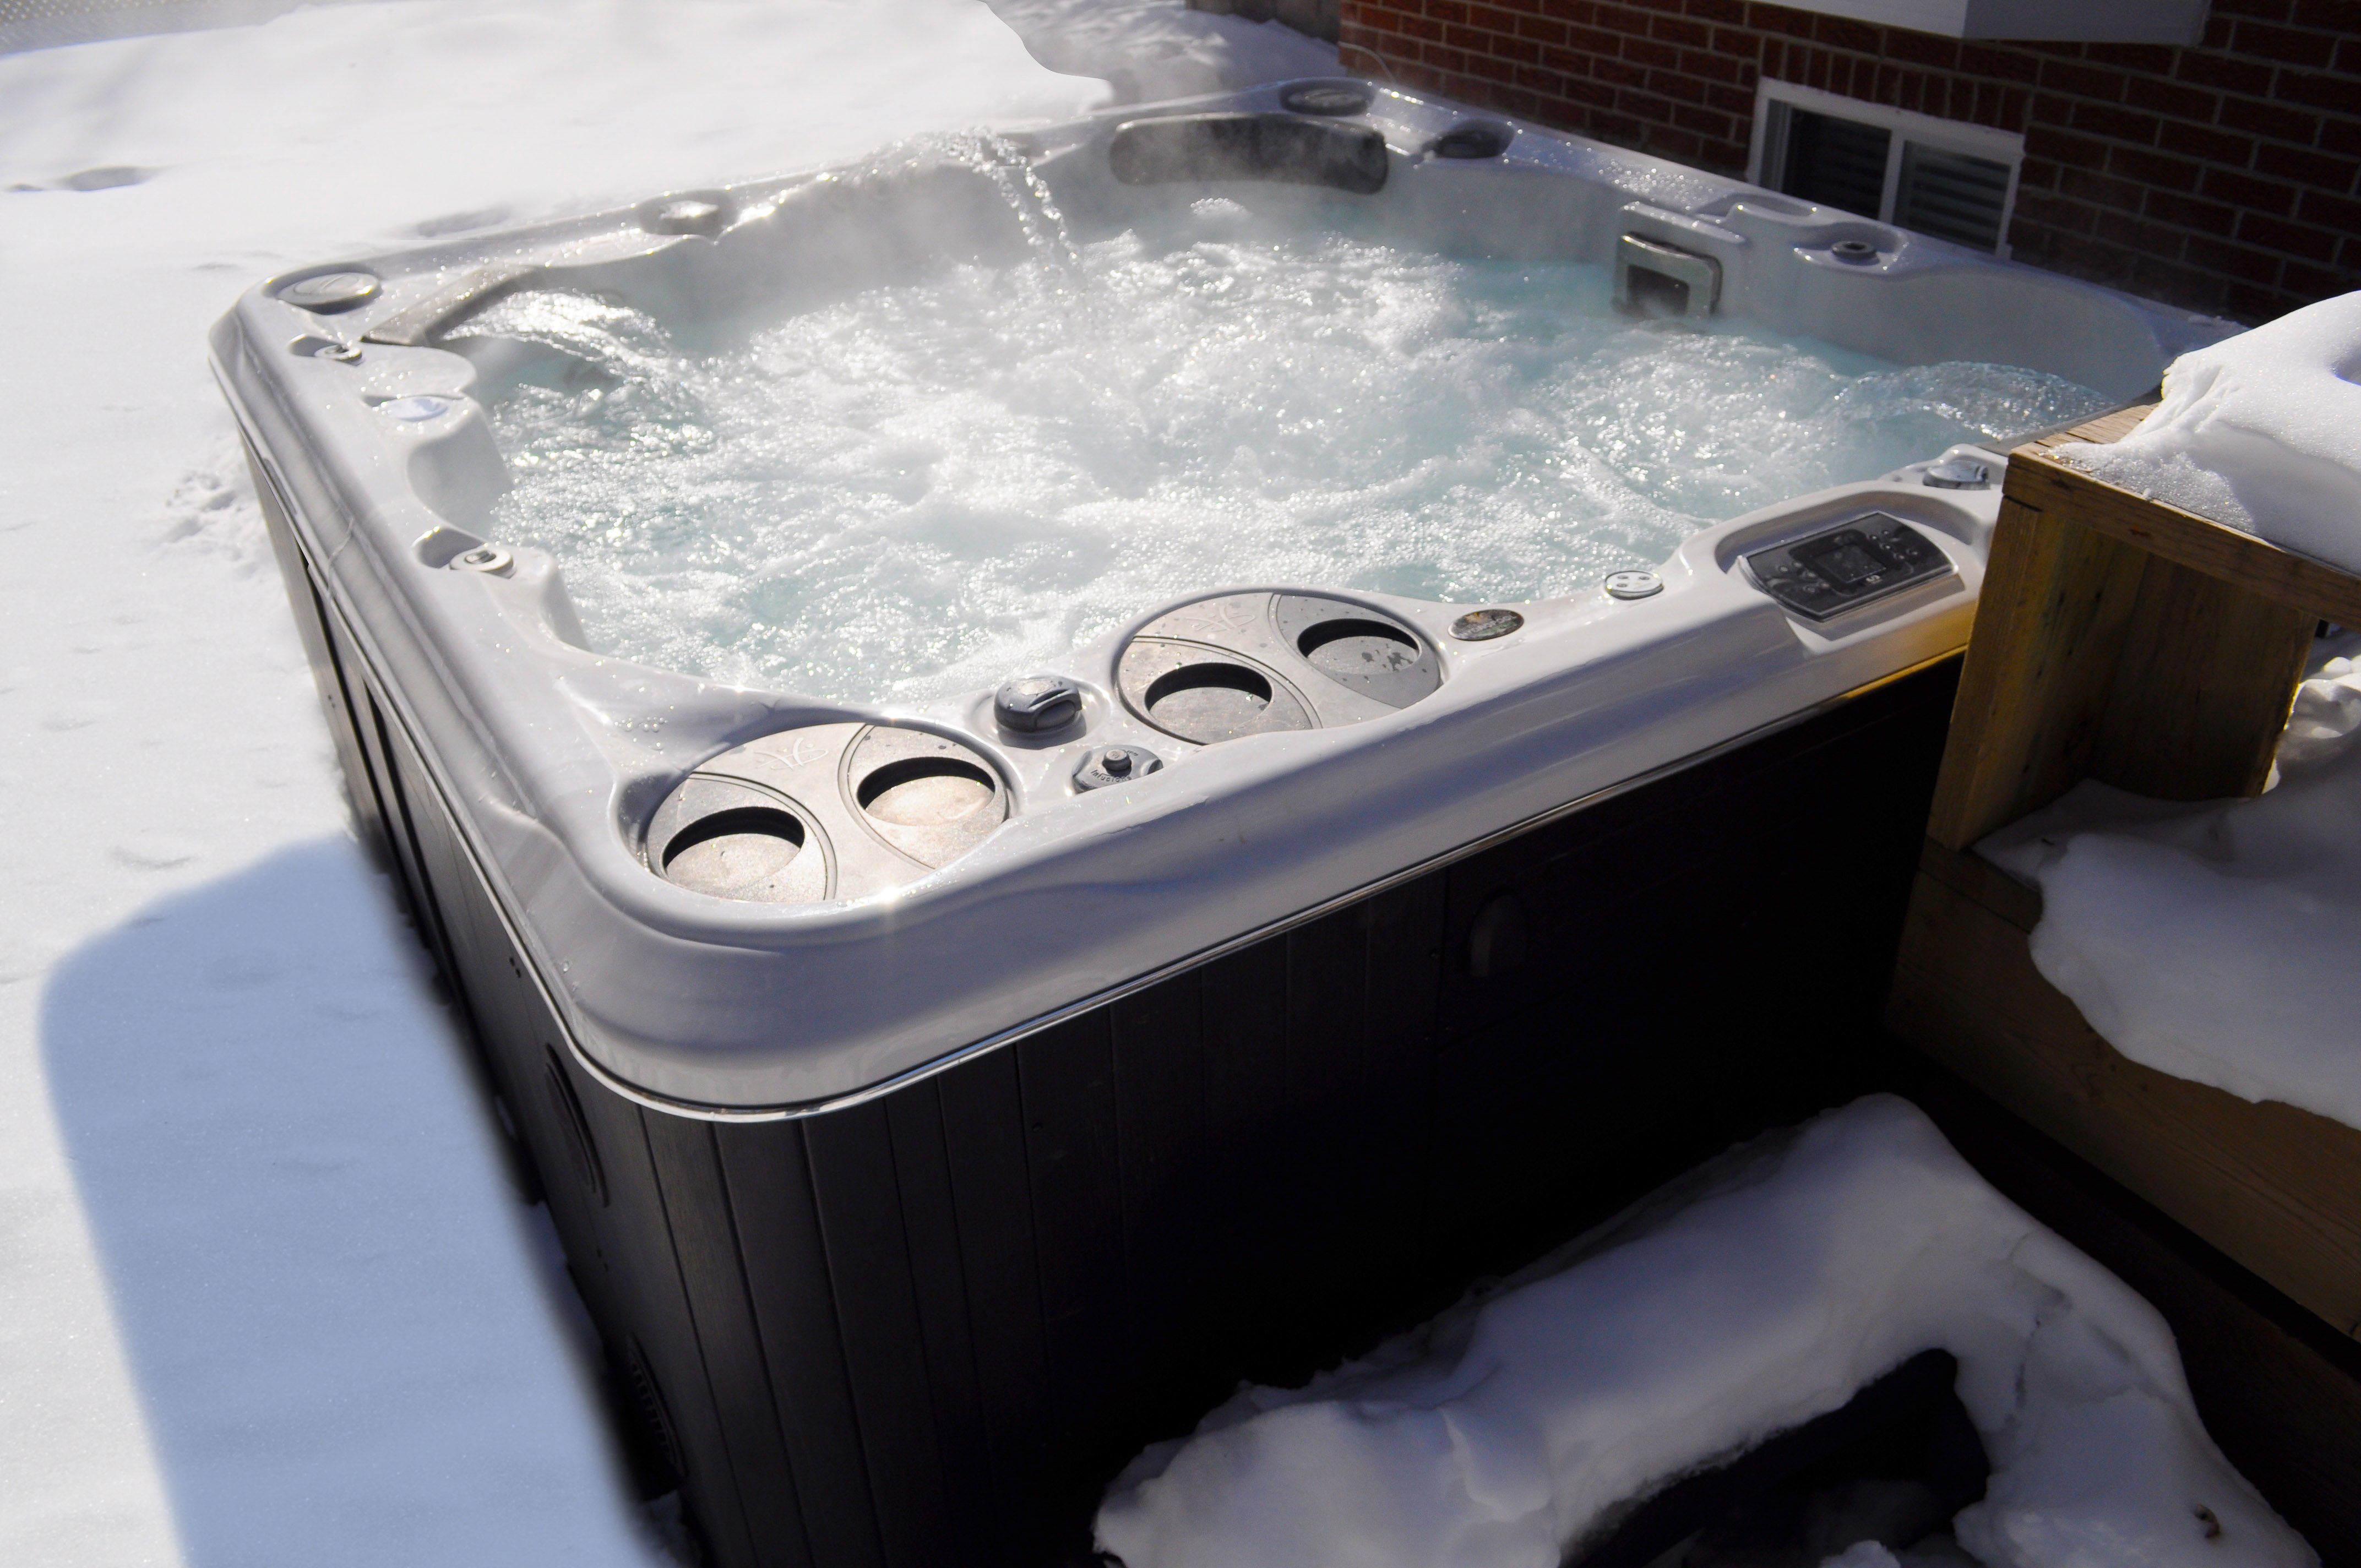 Hot tub in snow